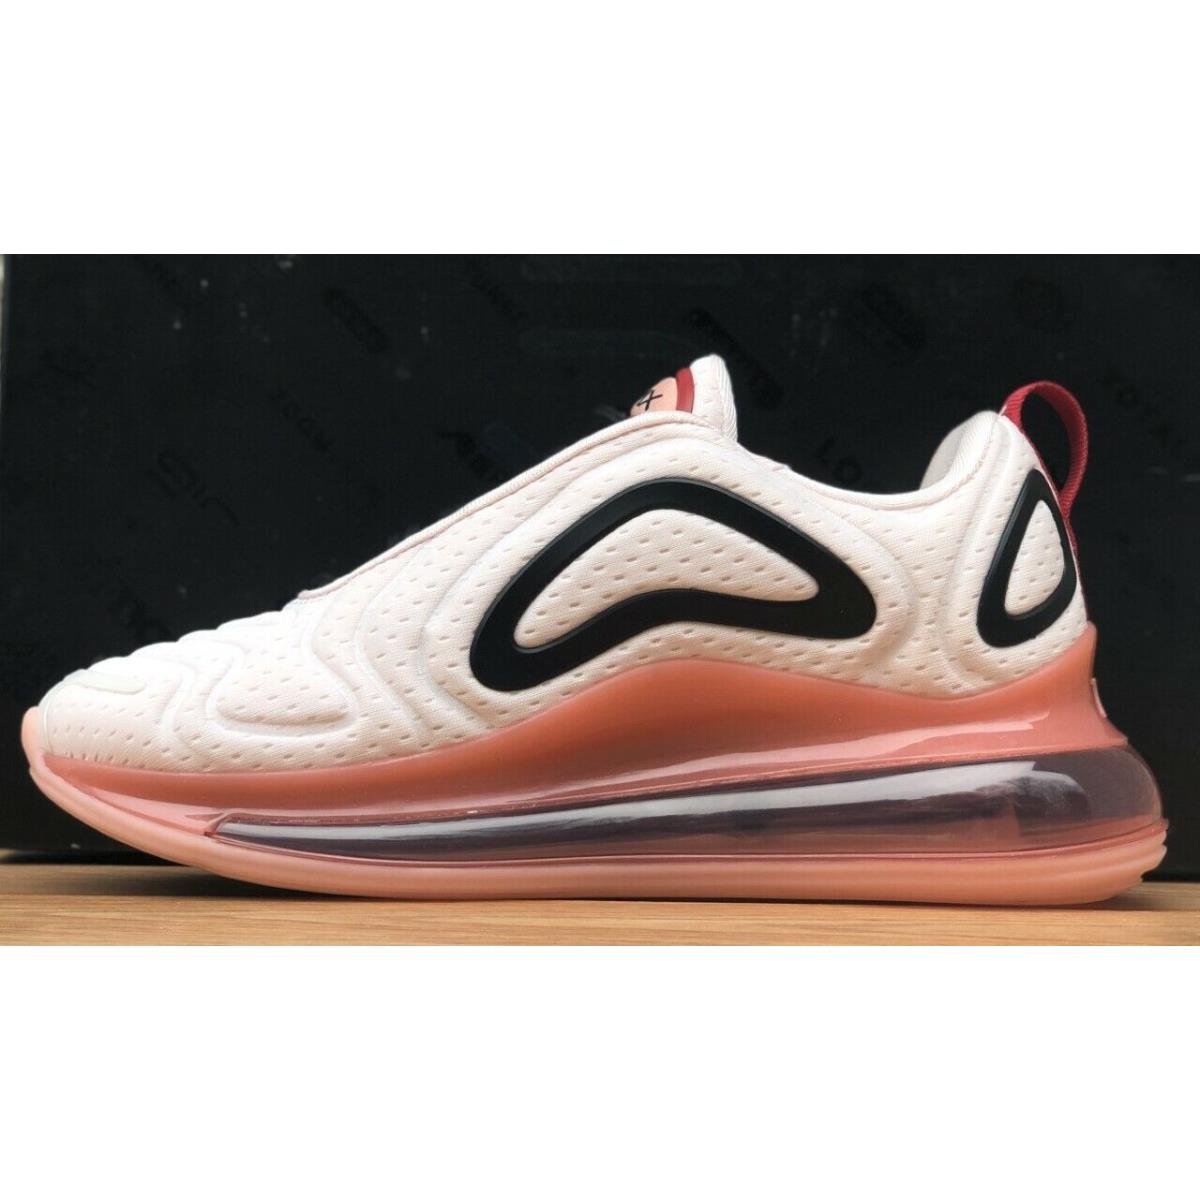 Nike shoes Air Max - Light Soft Pink / Gym Red 0